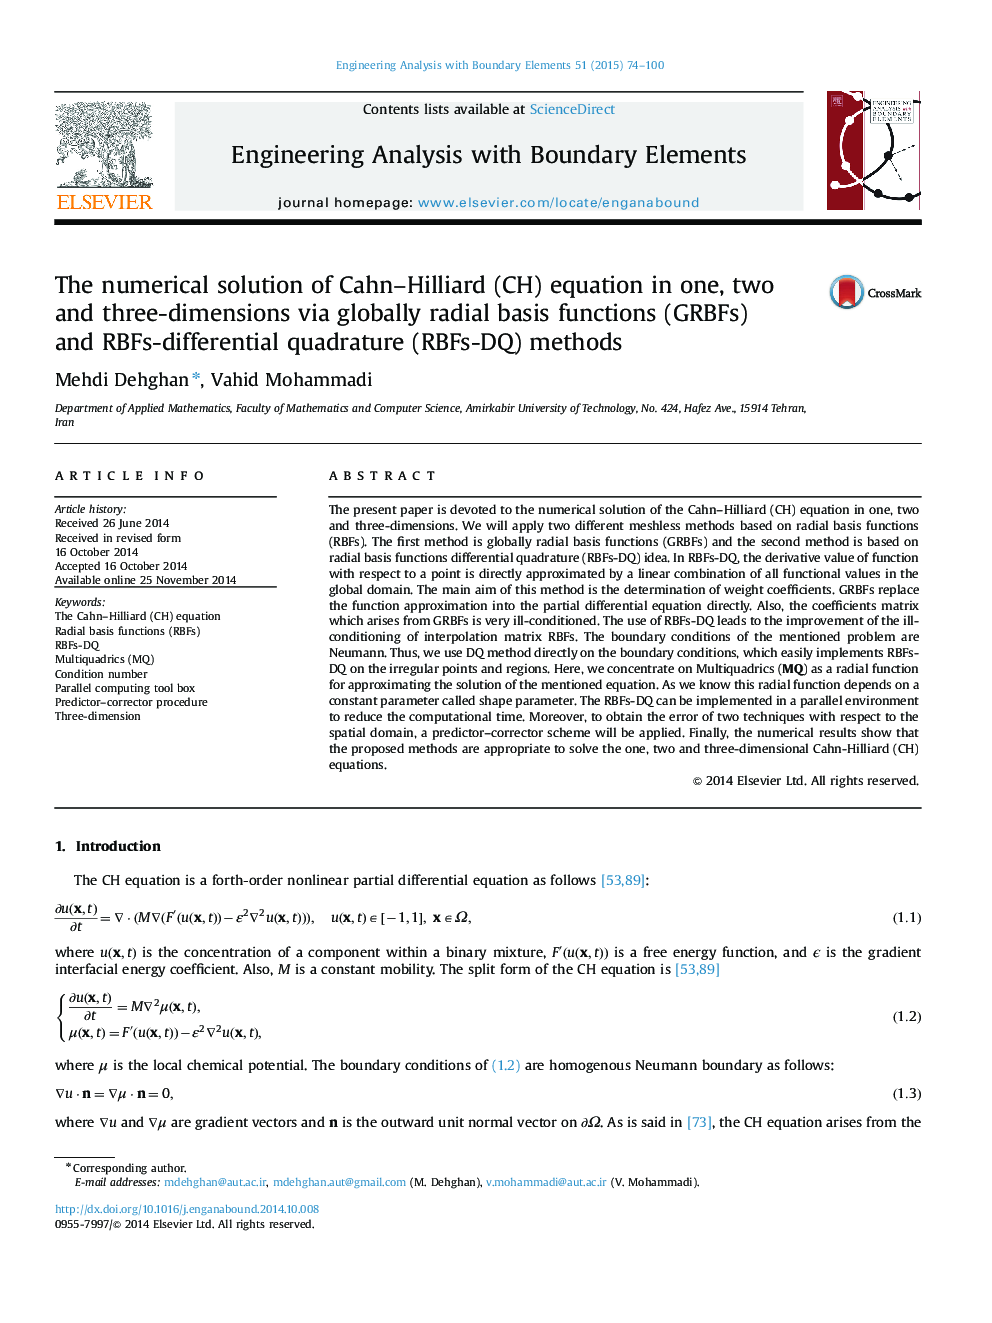 The numerical solution of Cahn–Hilliard (CH) equation in one, two and three-dimensions via globally radial basis functions (GRBFs) and RBFs-differential quadrature (RBFs-DQ) methods